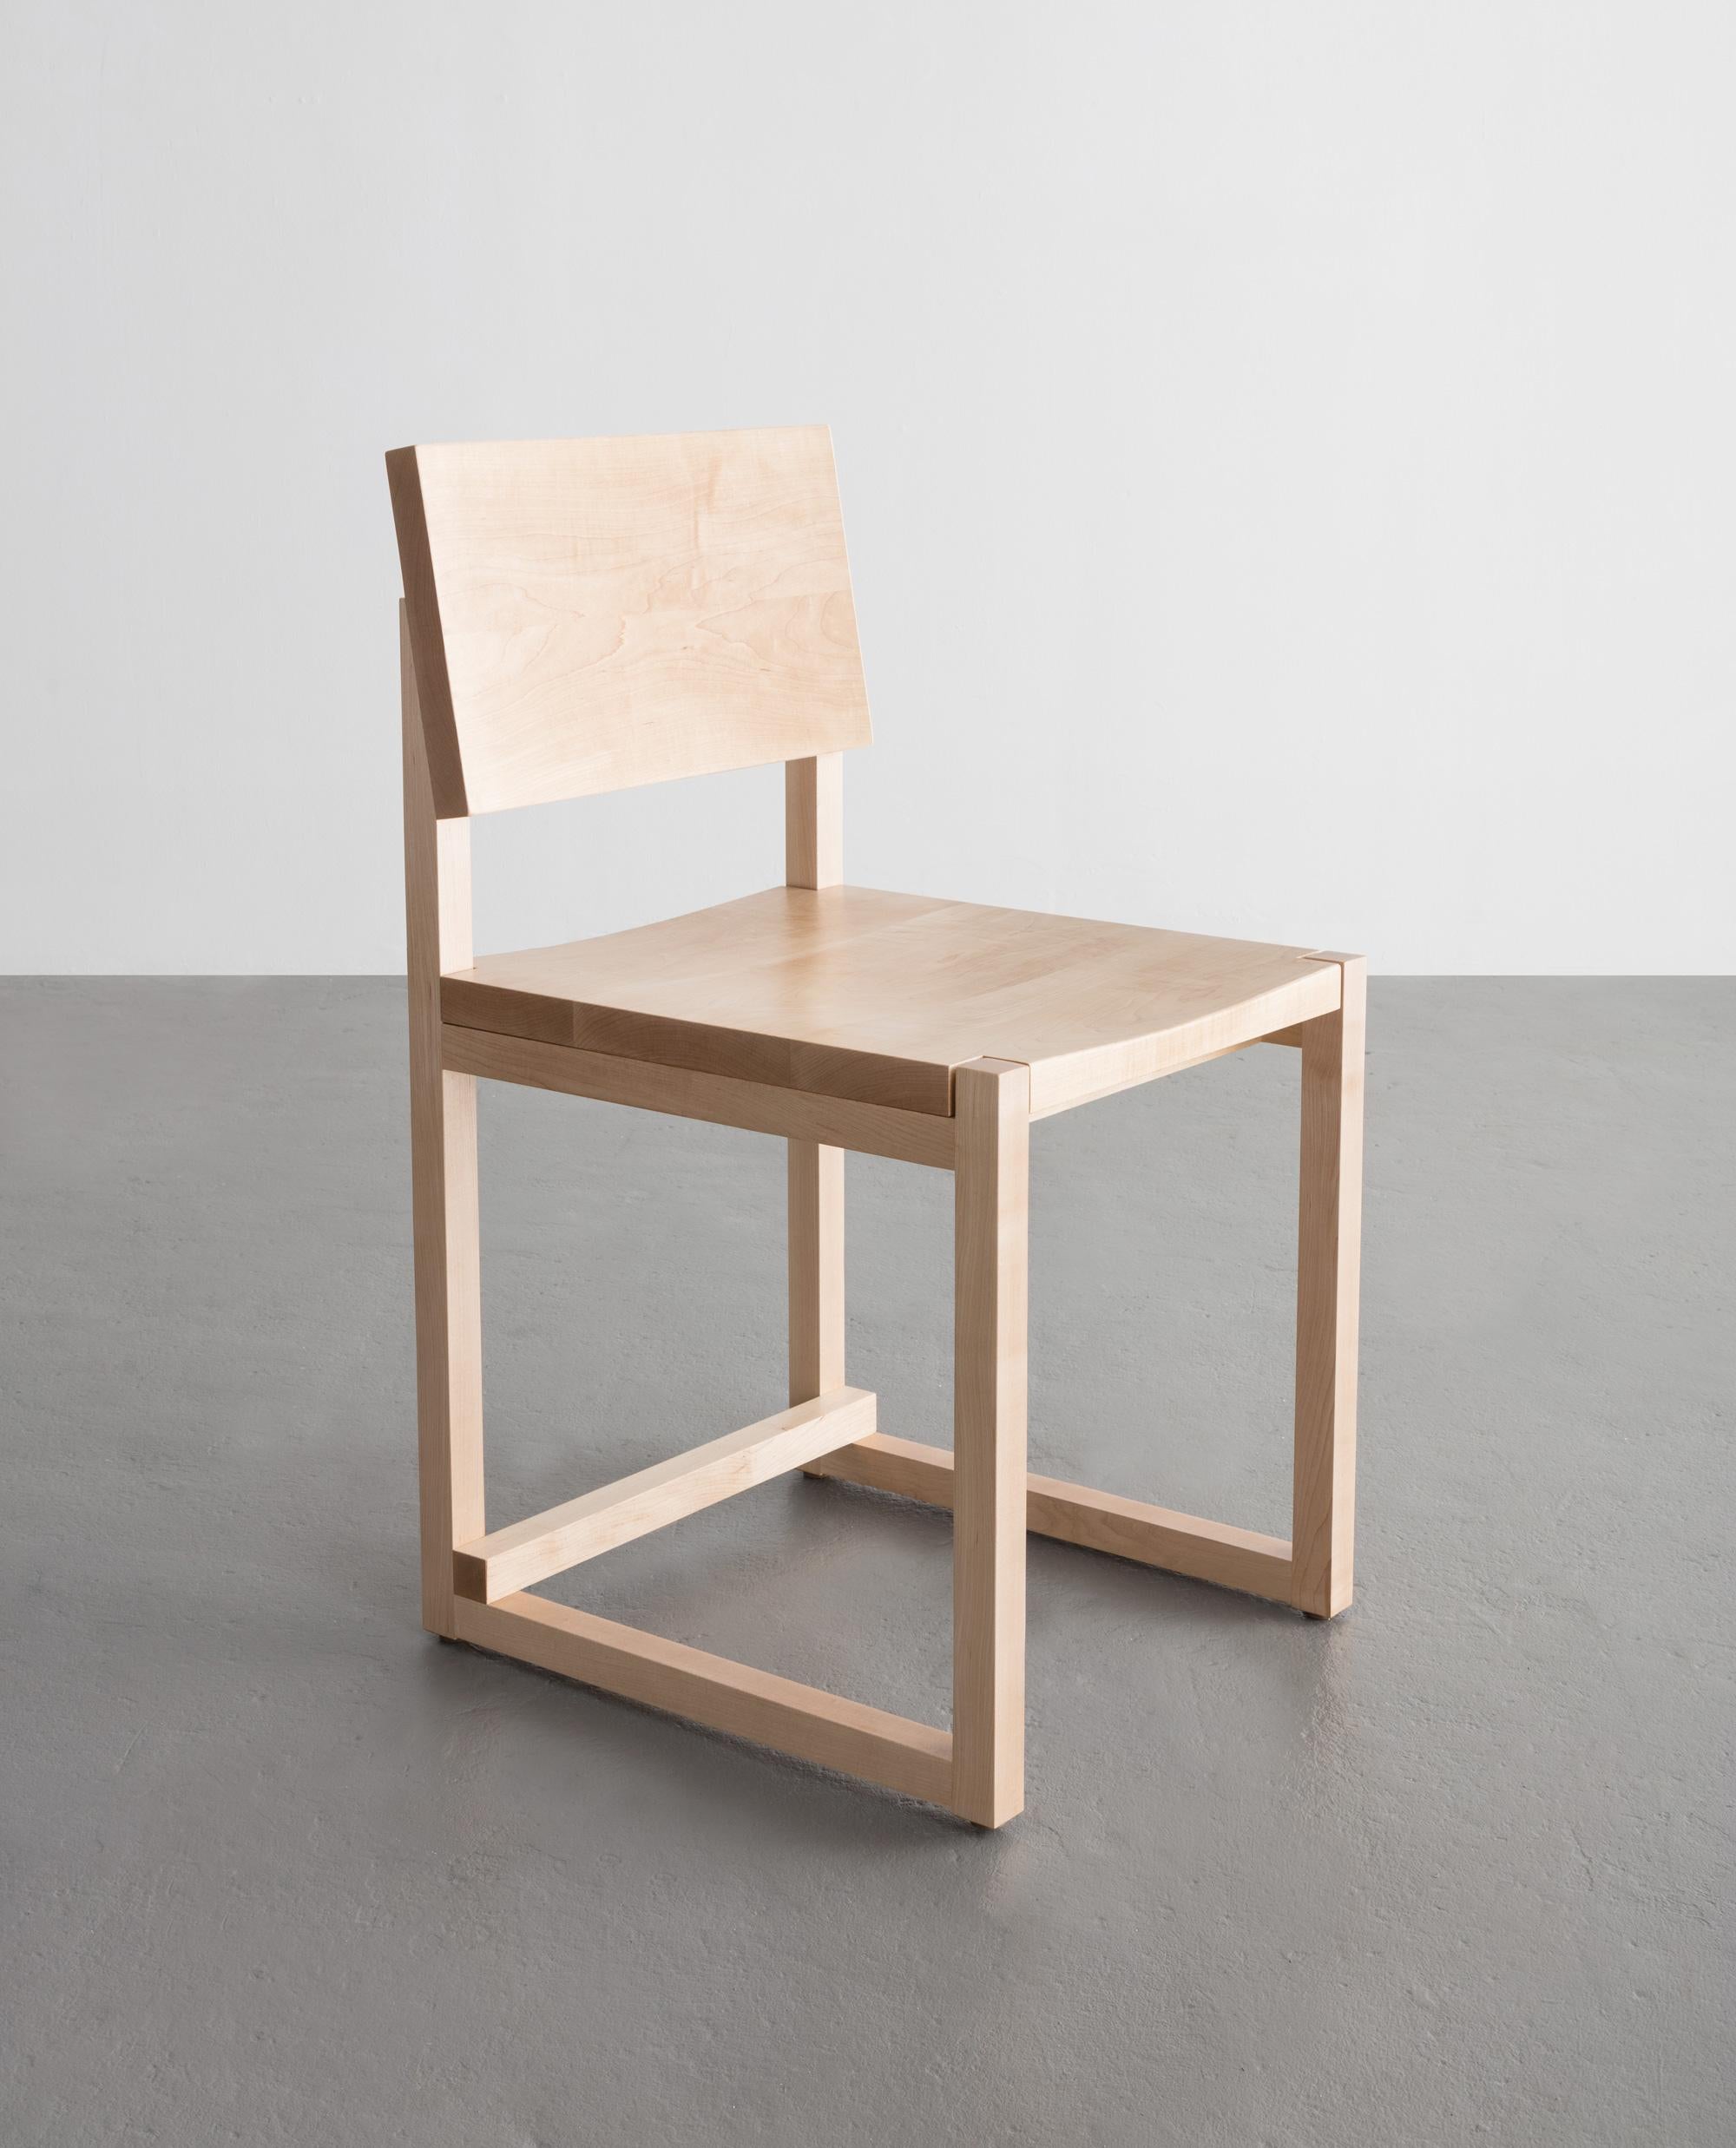 The SQ dining chair believes abstraction becomes principle when adhering to straight lines and rectangular forms.
 
Shown in maple and white oak. Also available in ash, cherry, or walnut.
 